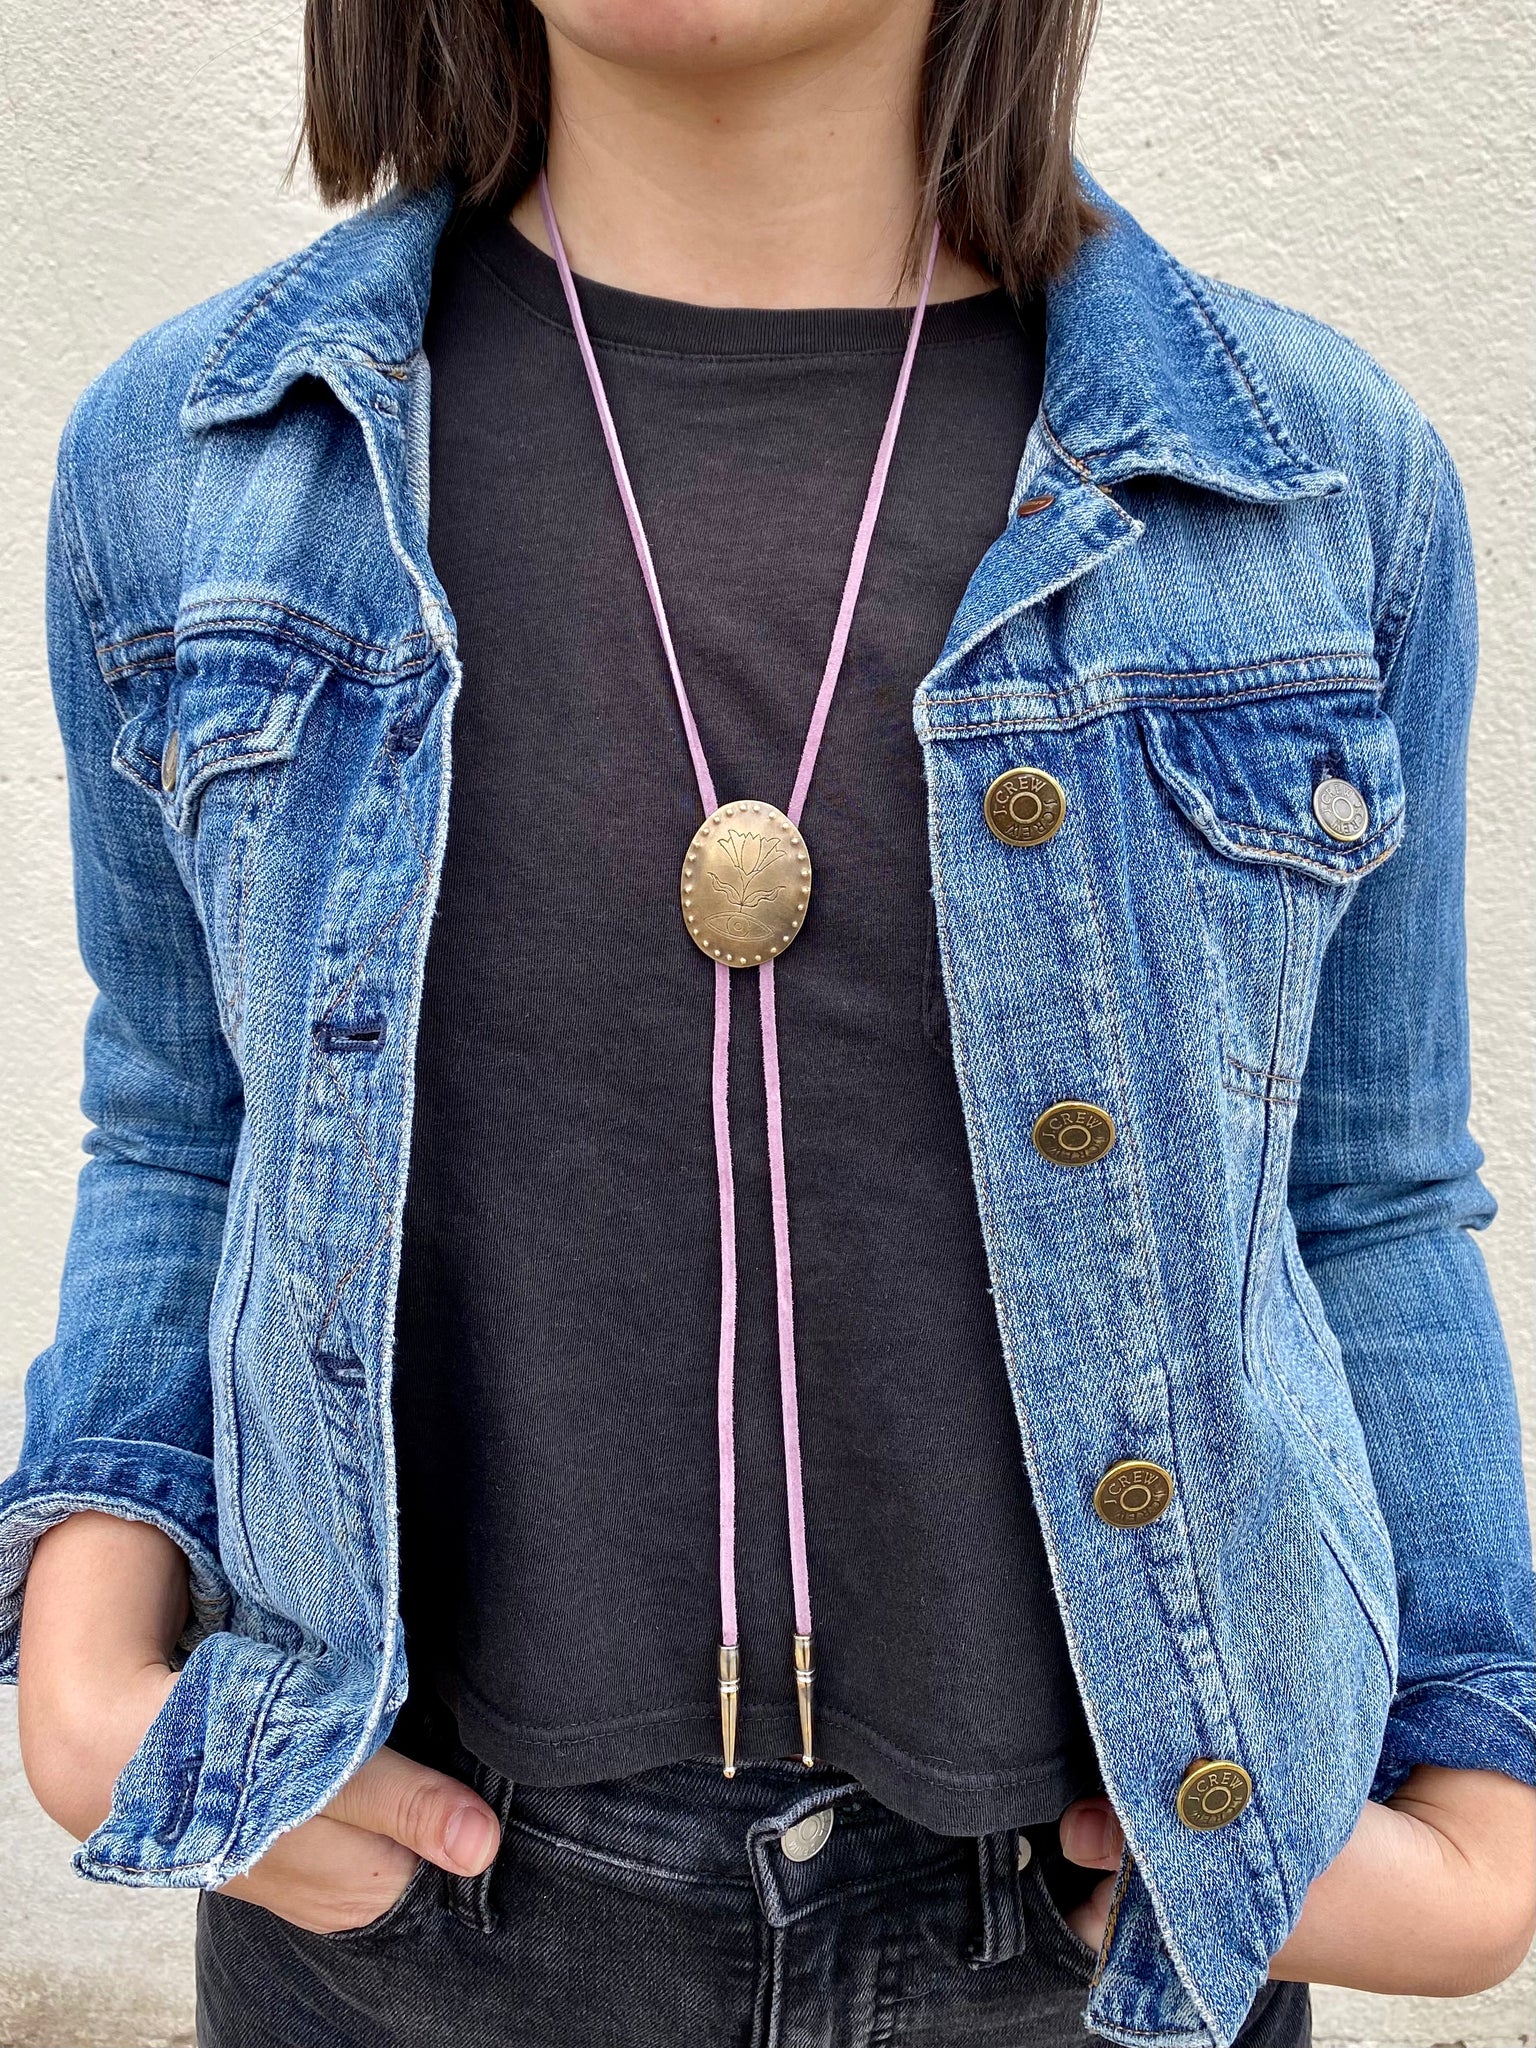 Claire Sommers Buck x Fort Lonesome DREAMLAND Bolo Tie